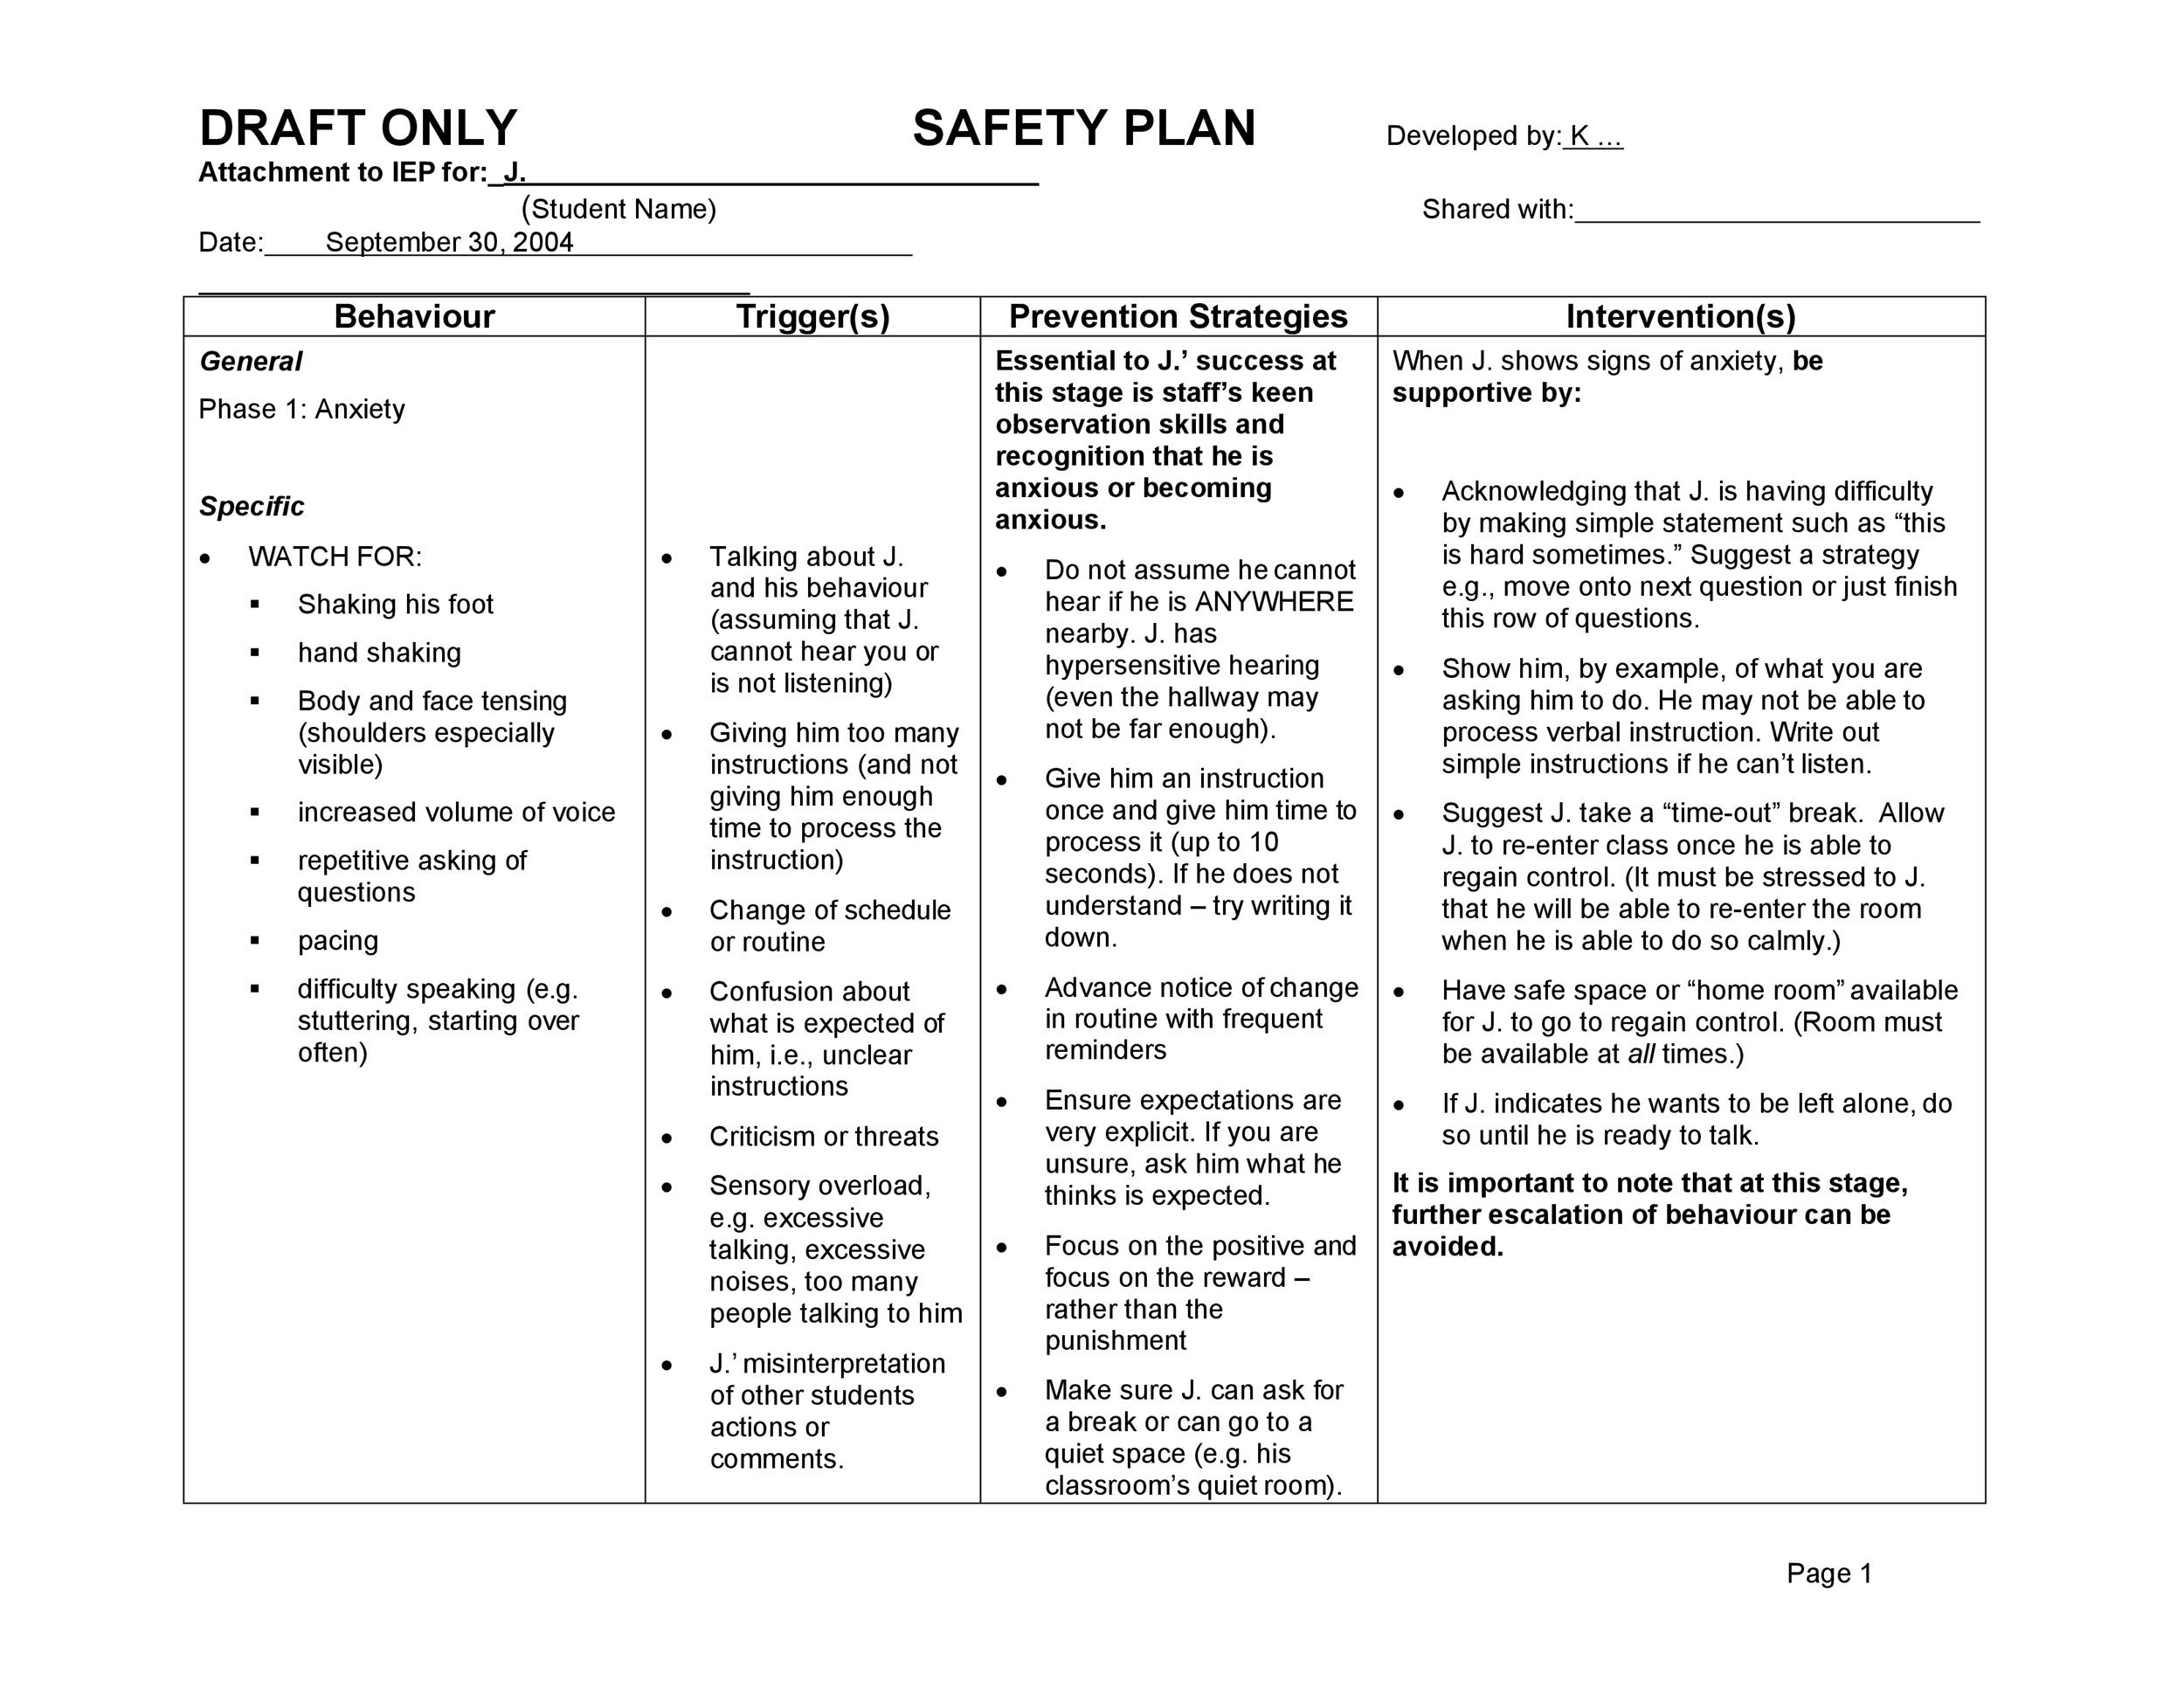 46 Great Safety Plan Templates (Construction Site Specific Patient